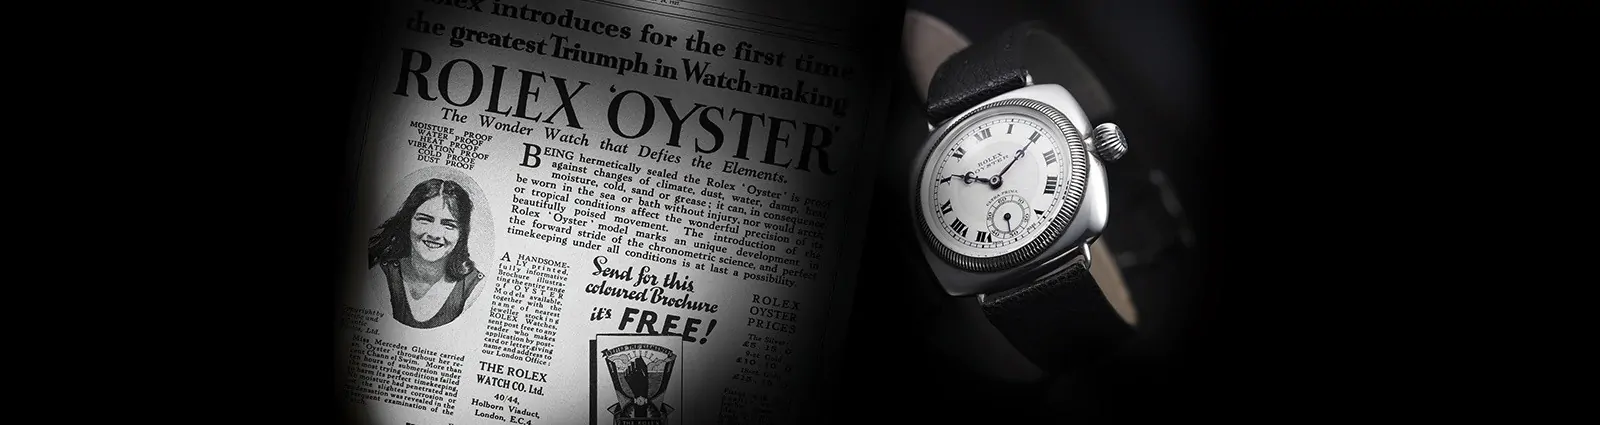 Making History - The Rolex Oyster Perpetual